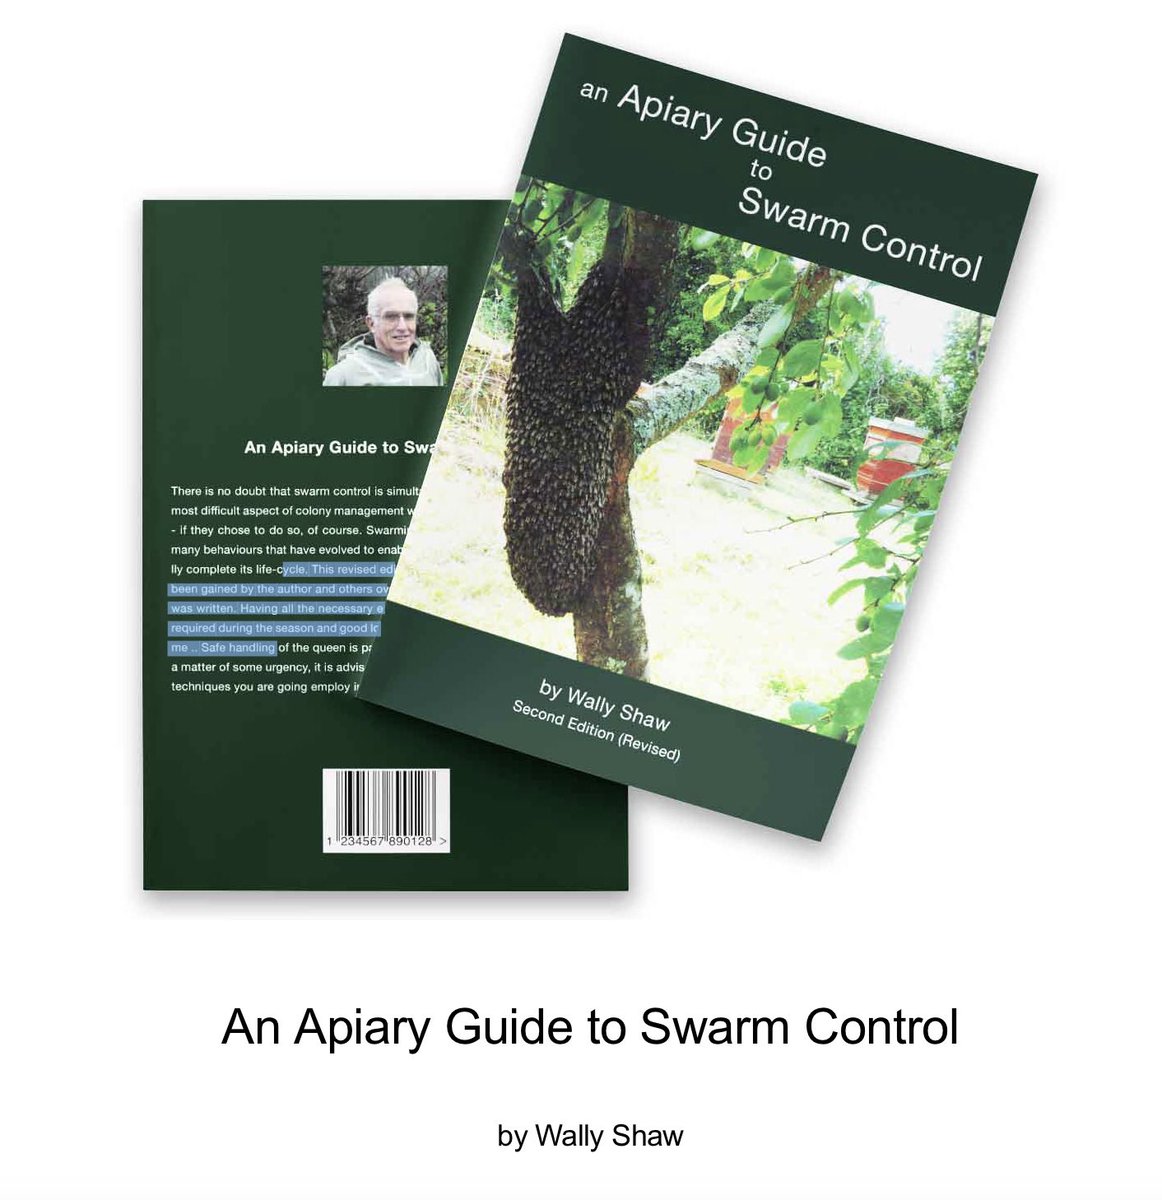 Essential reading for the swarm season. An Apiary Guide to Swarm Control by Wally Shaw
For more info & to buy - click here: northernbeebooks.co.uk/products/shaw-…
#swarmseason #beekeeping #apiculture